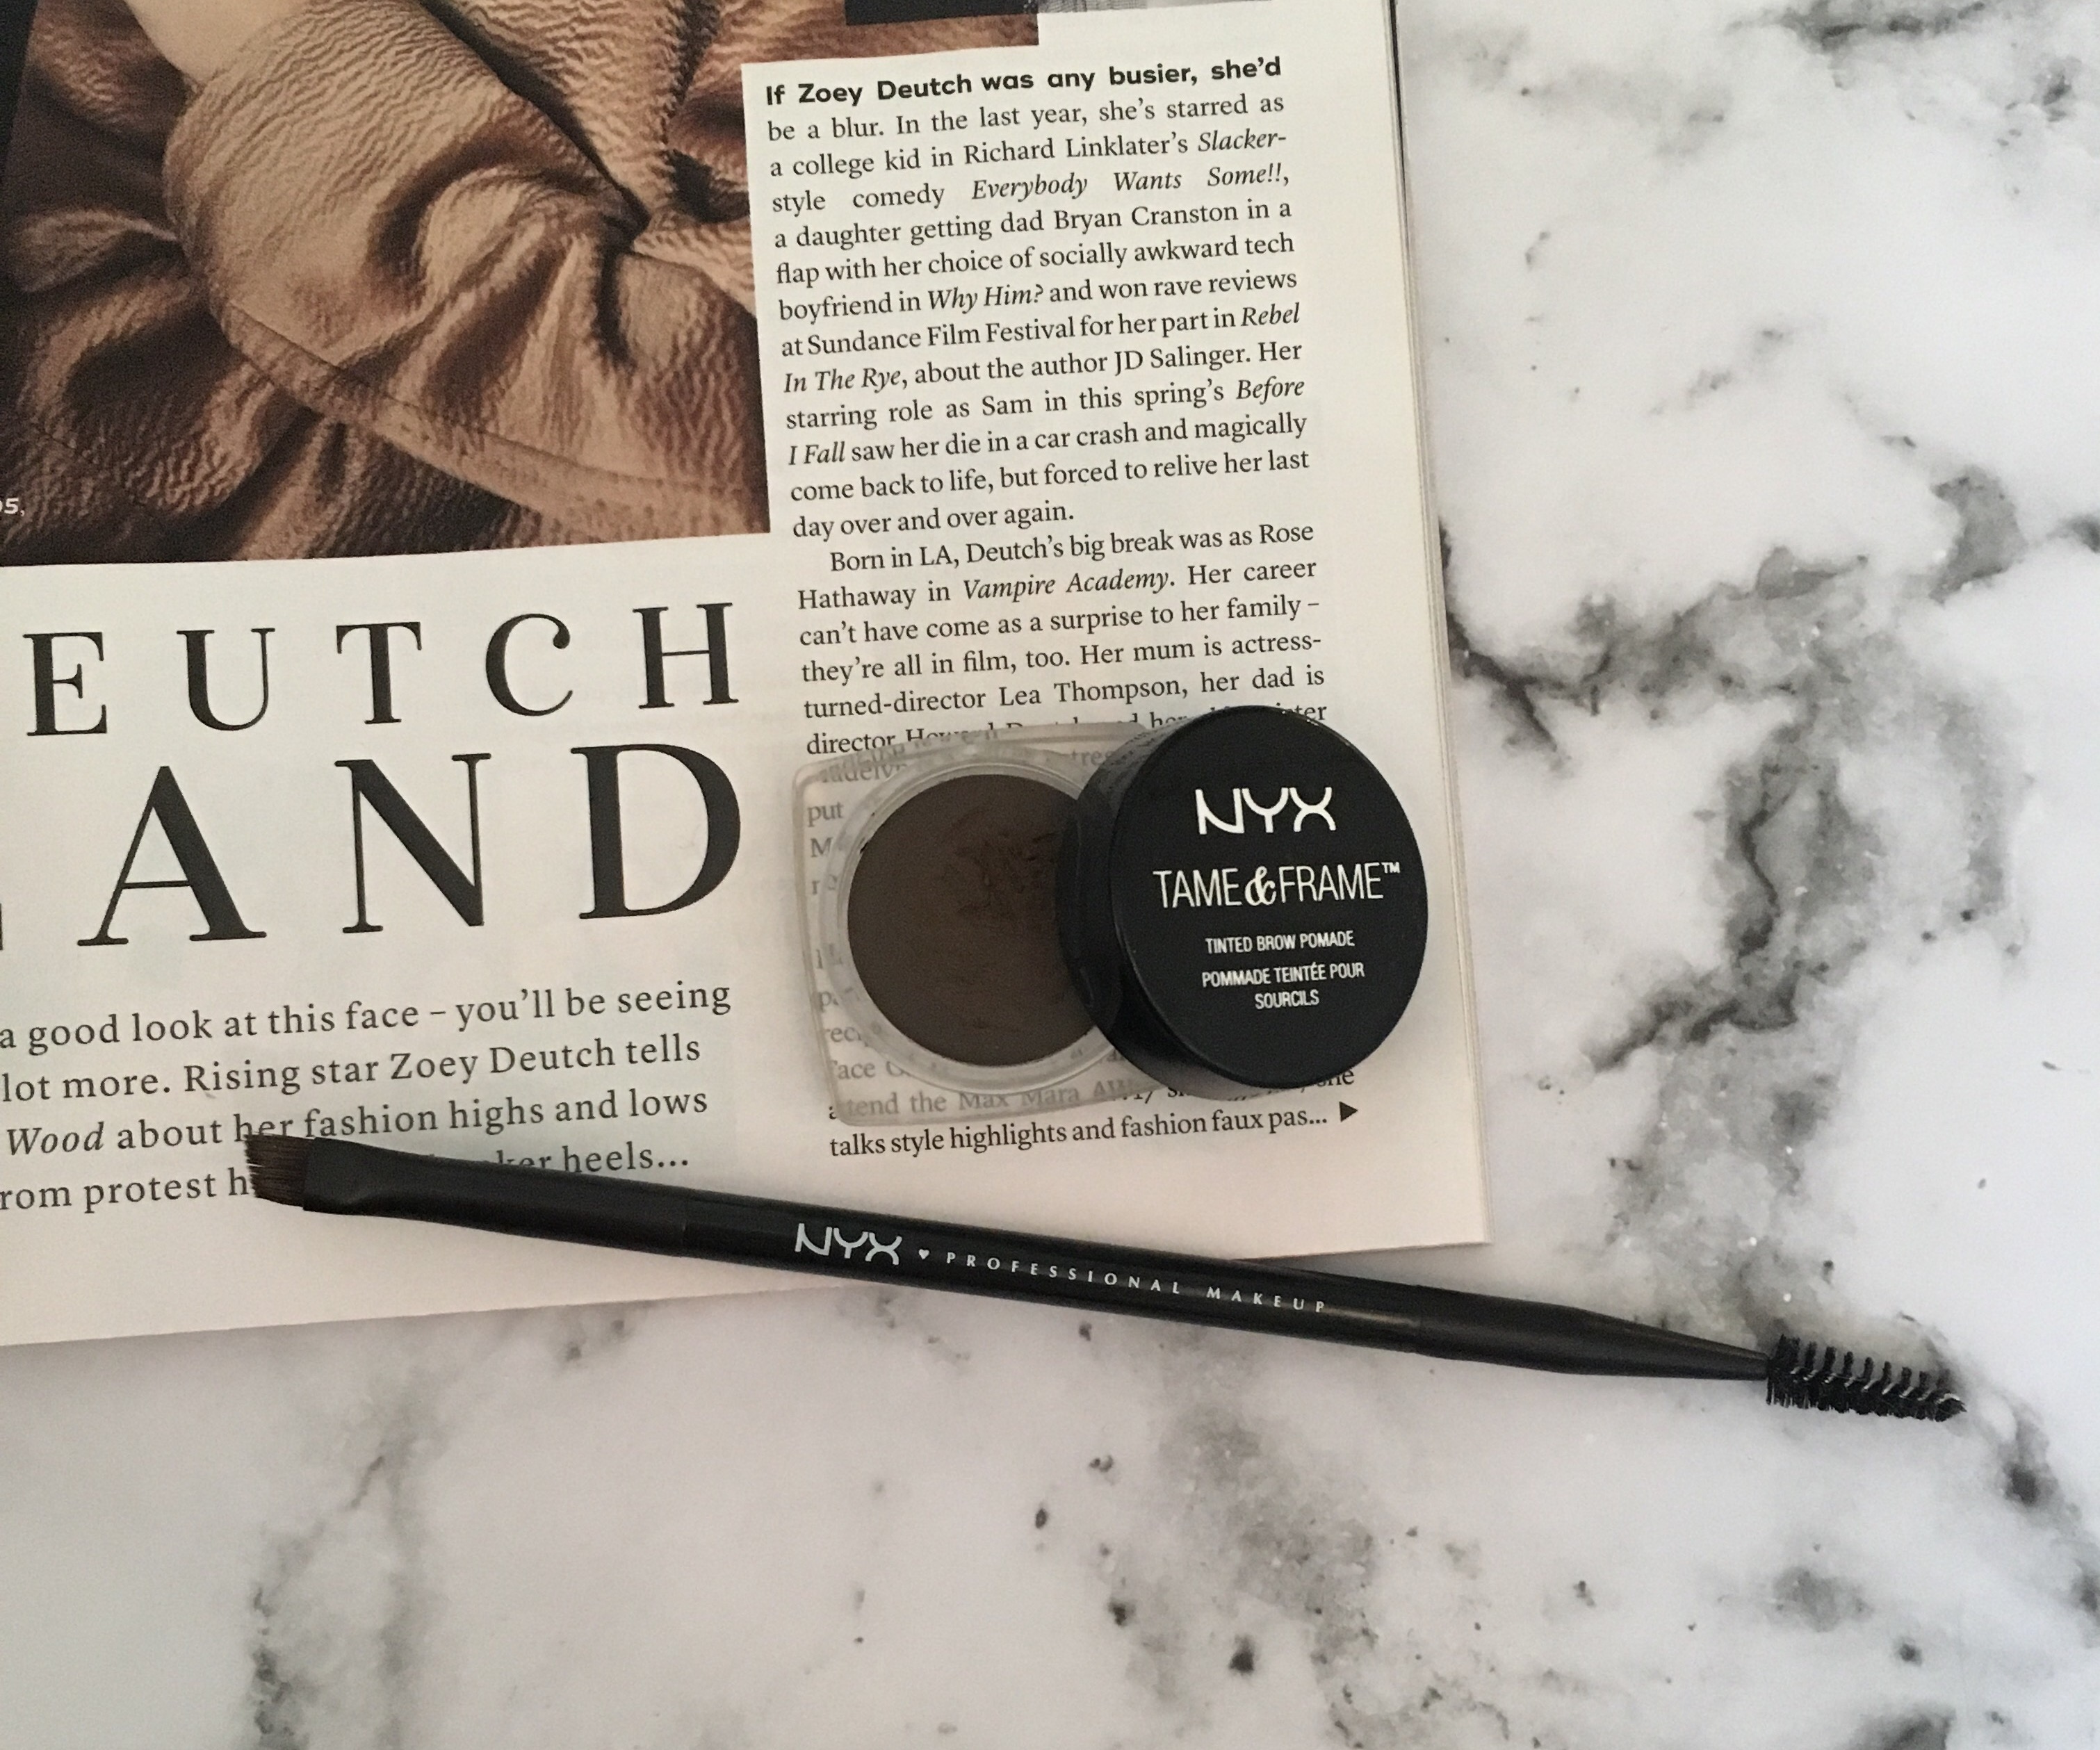 NYX Tame & Frame Eyebrow Pomade with an eyebrow brush and spooley next to it